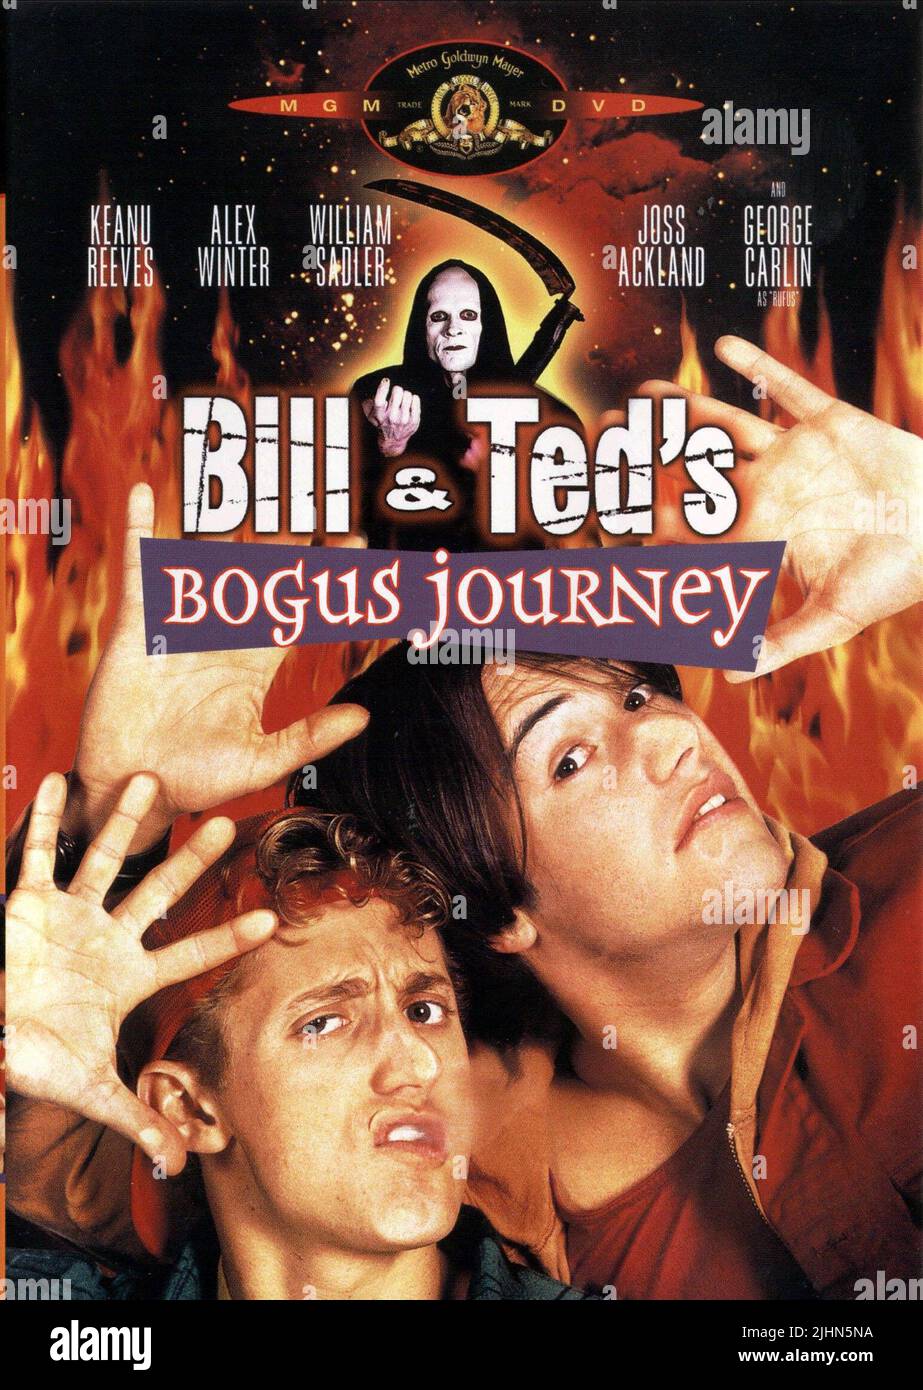 WILLIAM SADLER, ALEX WINTER, KEANU REEVES POSTER, BILL and TED'S BOGUS JOURNEY, 1991 Stock Photo